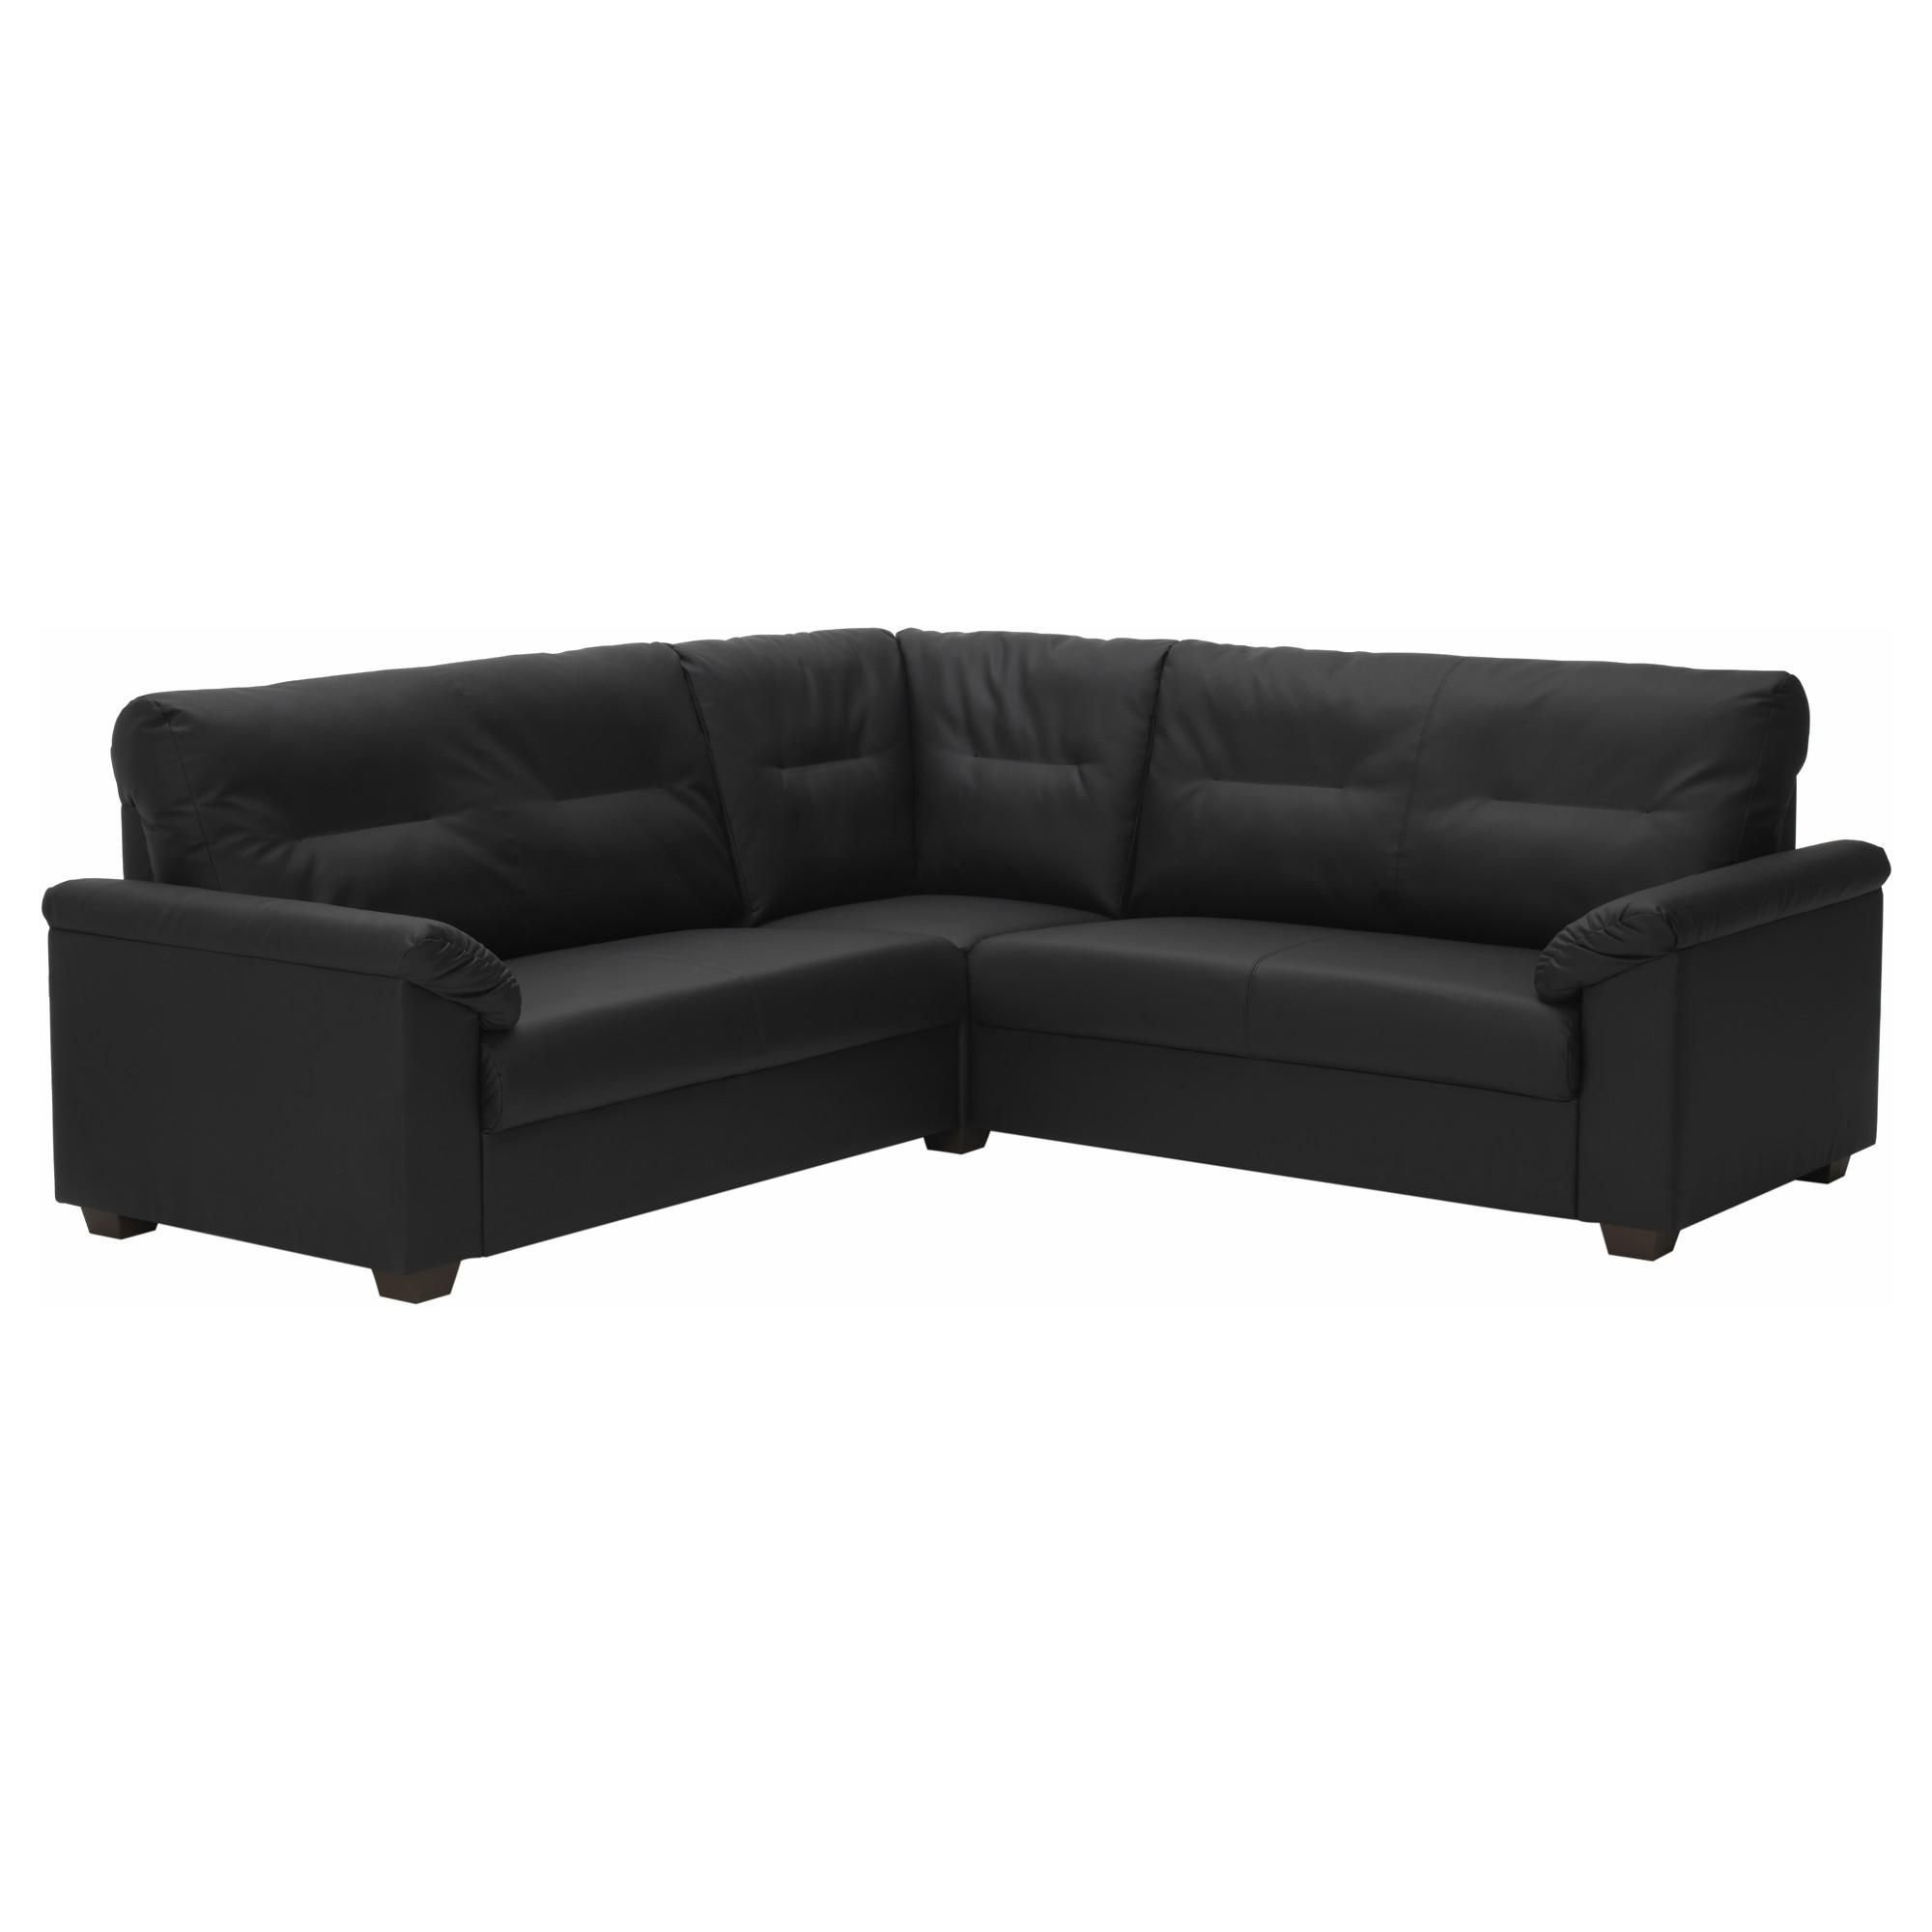 Leather & Faux Leather Couches, Chairs & Ottomans – Ikea With Regard To Small Brown Leather Corner Sofas (View 7 of 21)